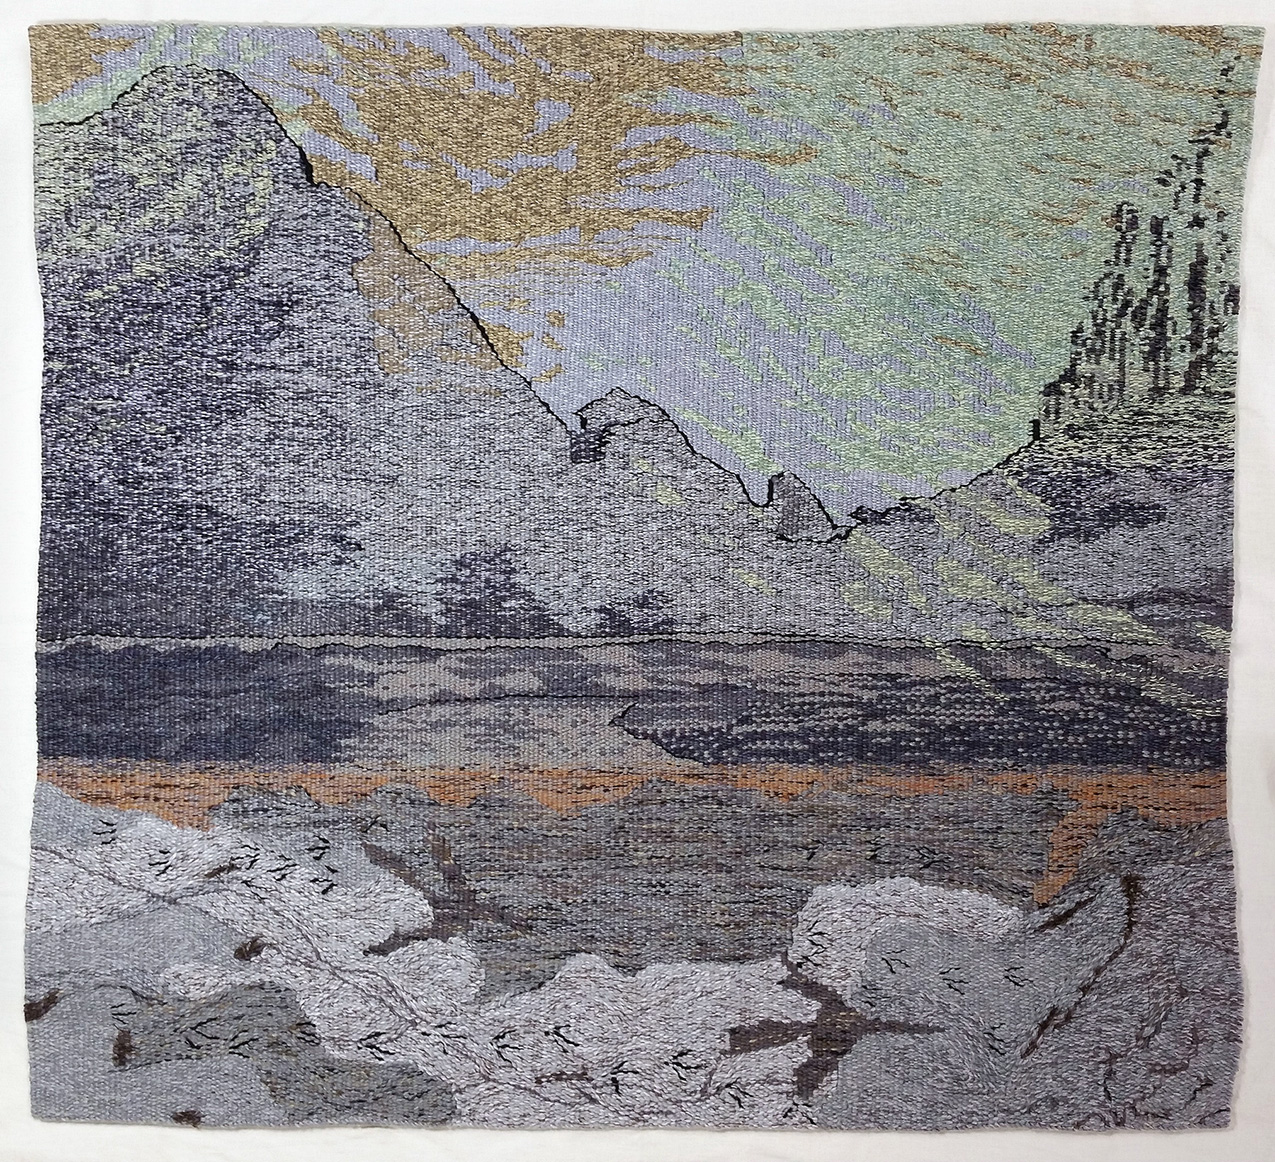 handwoven tapestry depicting a canyon’s cliffs superimposed over a view looking straight down onto the river and its bank marked with tracks of turkeys, smaller birds, and insects. colors are mostly gray with muted shades of rush, gold, light green, and deep blue-purple.